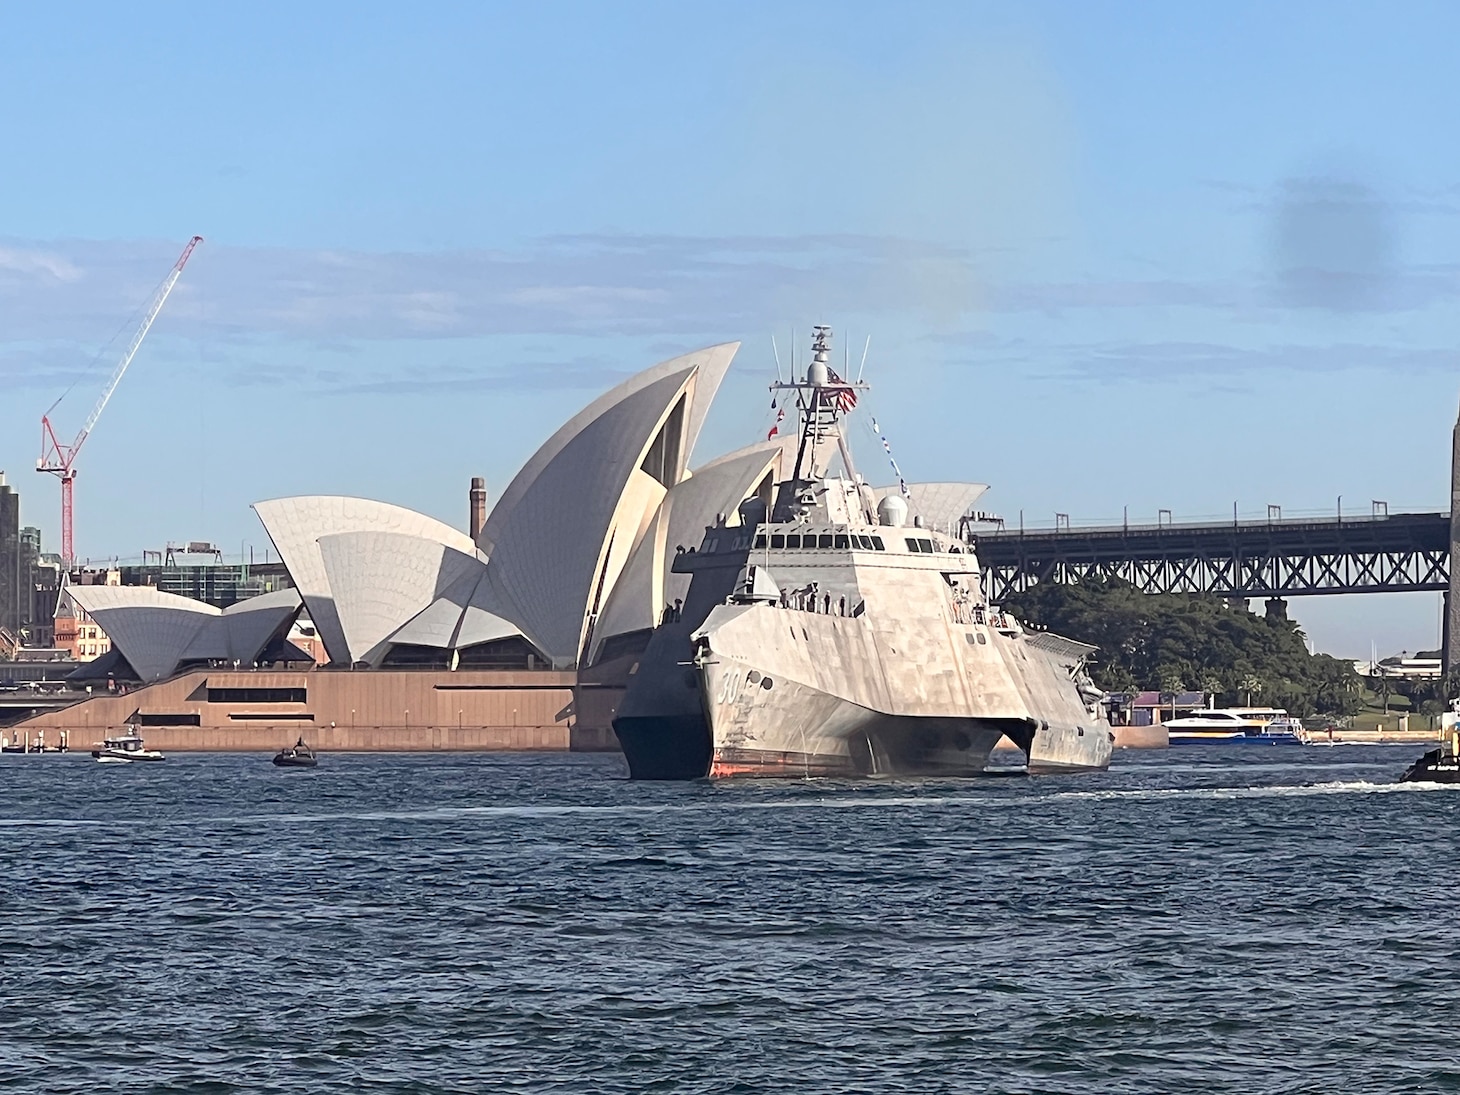 Australia welcomed the USS Canberra to Sydney Harbour, with HMAS Canberra guiding the Independence-variant littoral combat ship to berth alongside Fleet Base East ahead of the formal commissioning on 22 July.